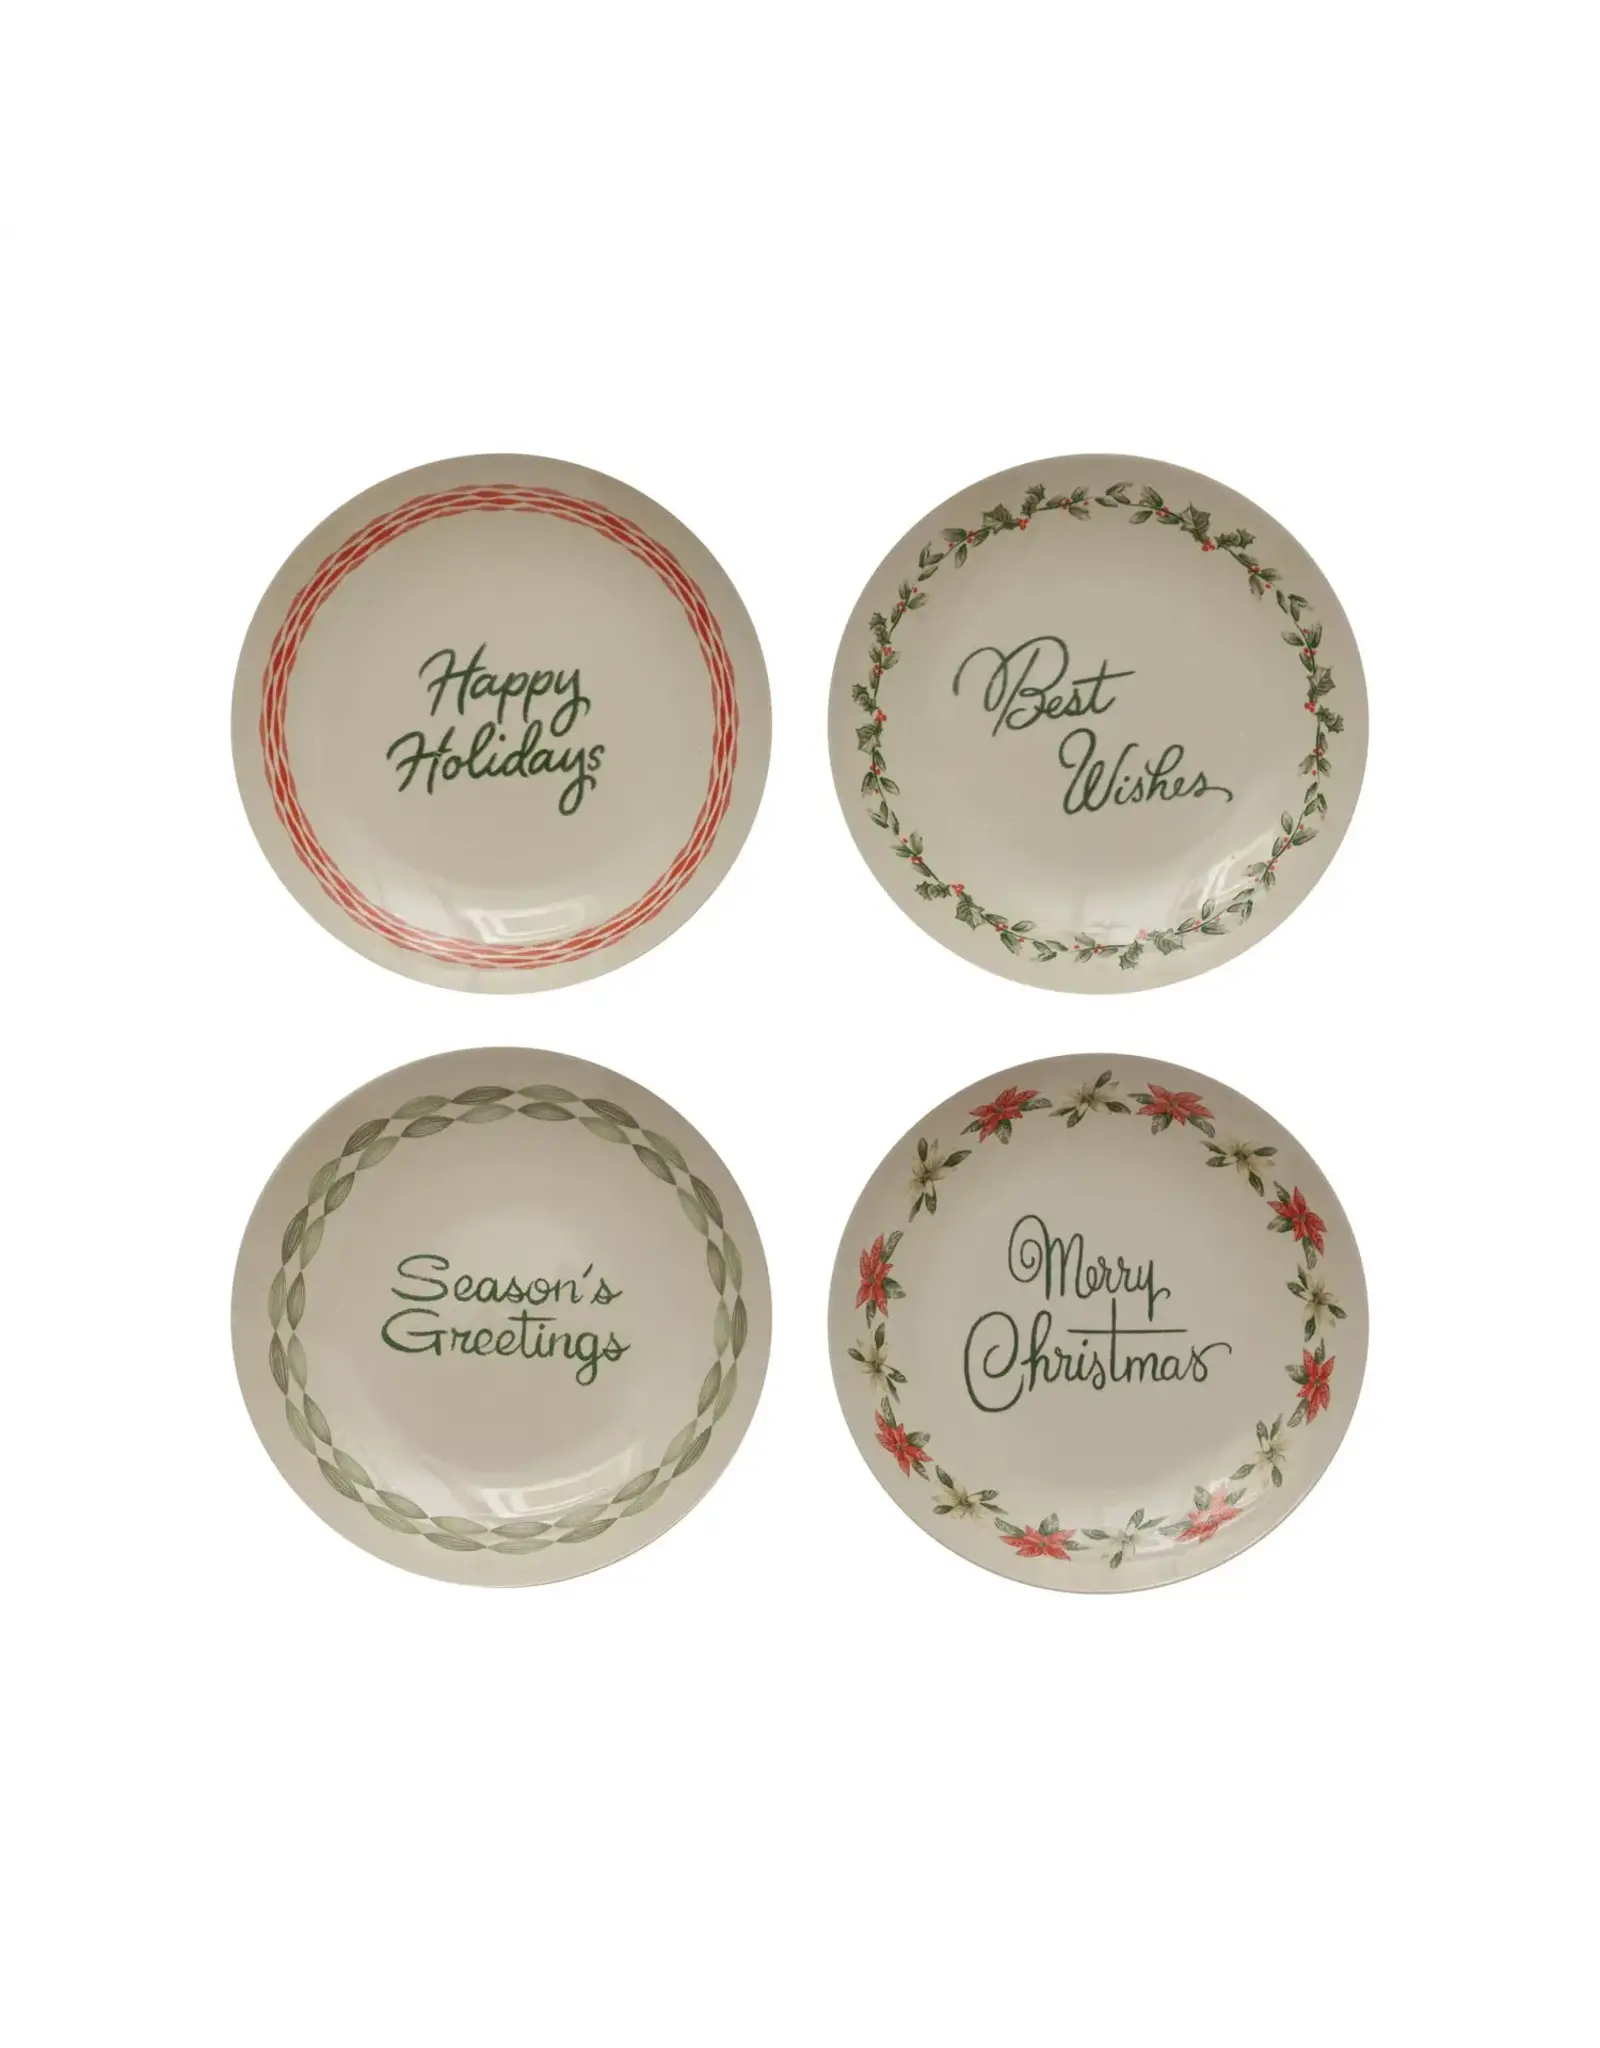 8" Round Stoneware Plate with Holiday Greeting 4 Styles each XS0756A